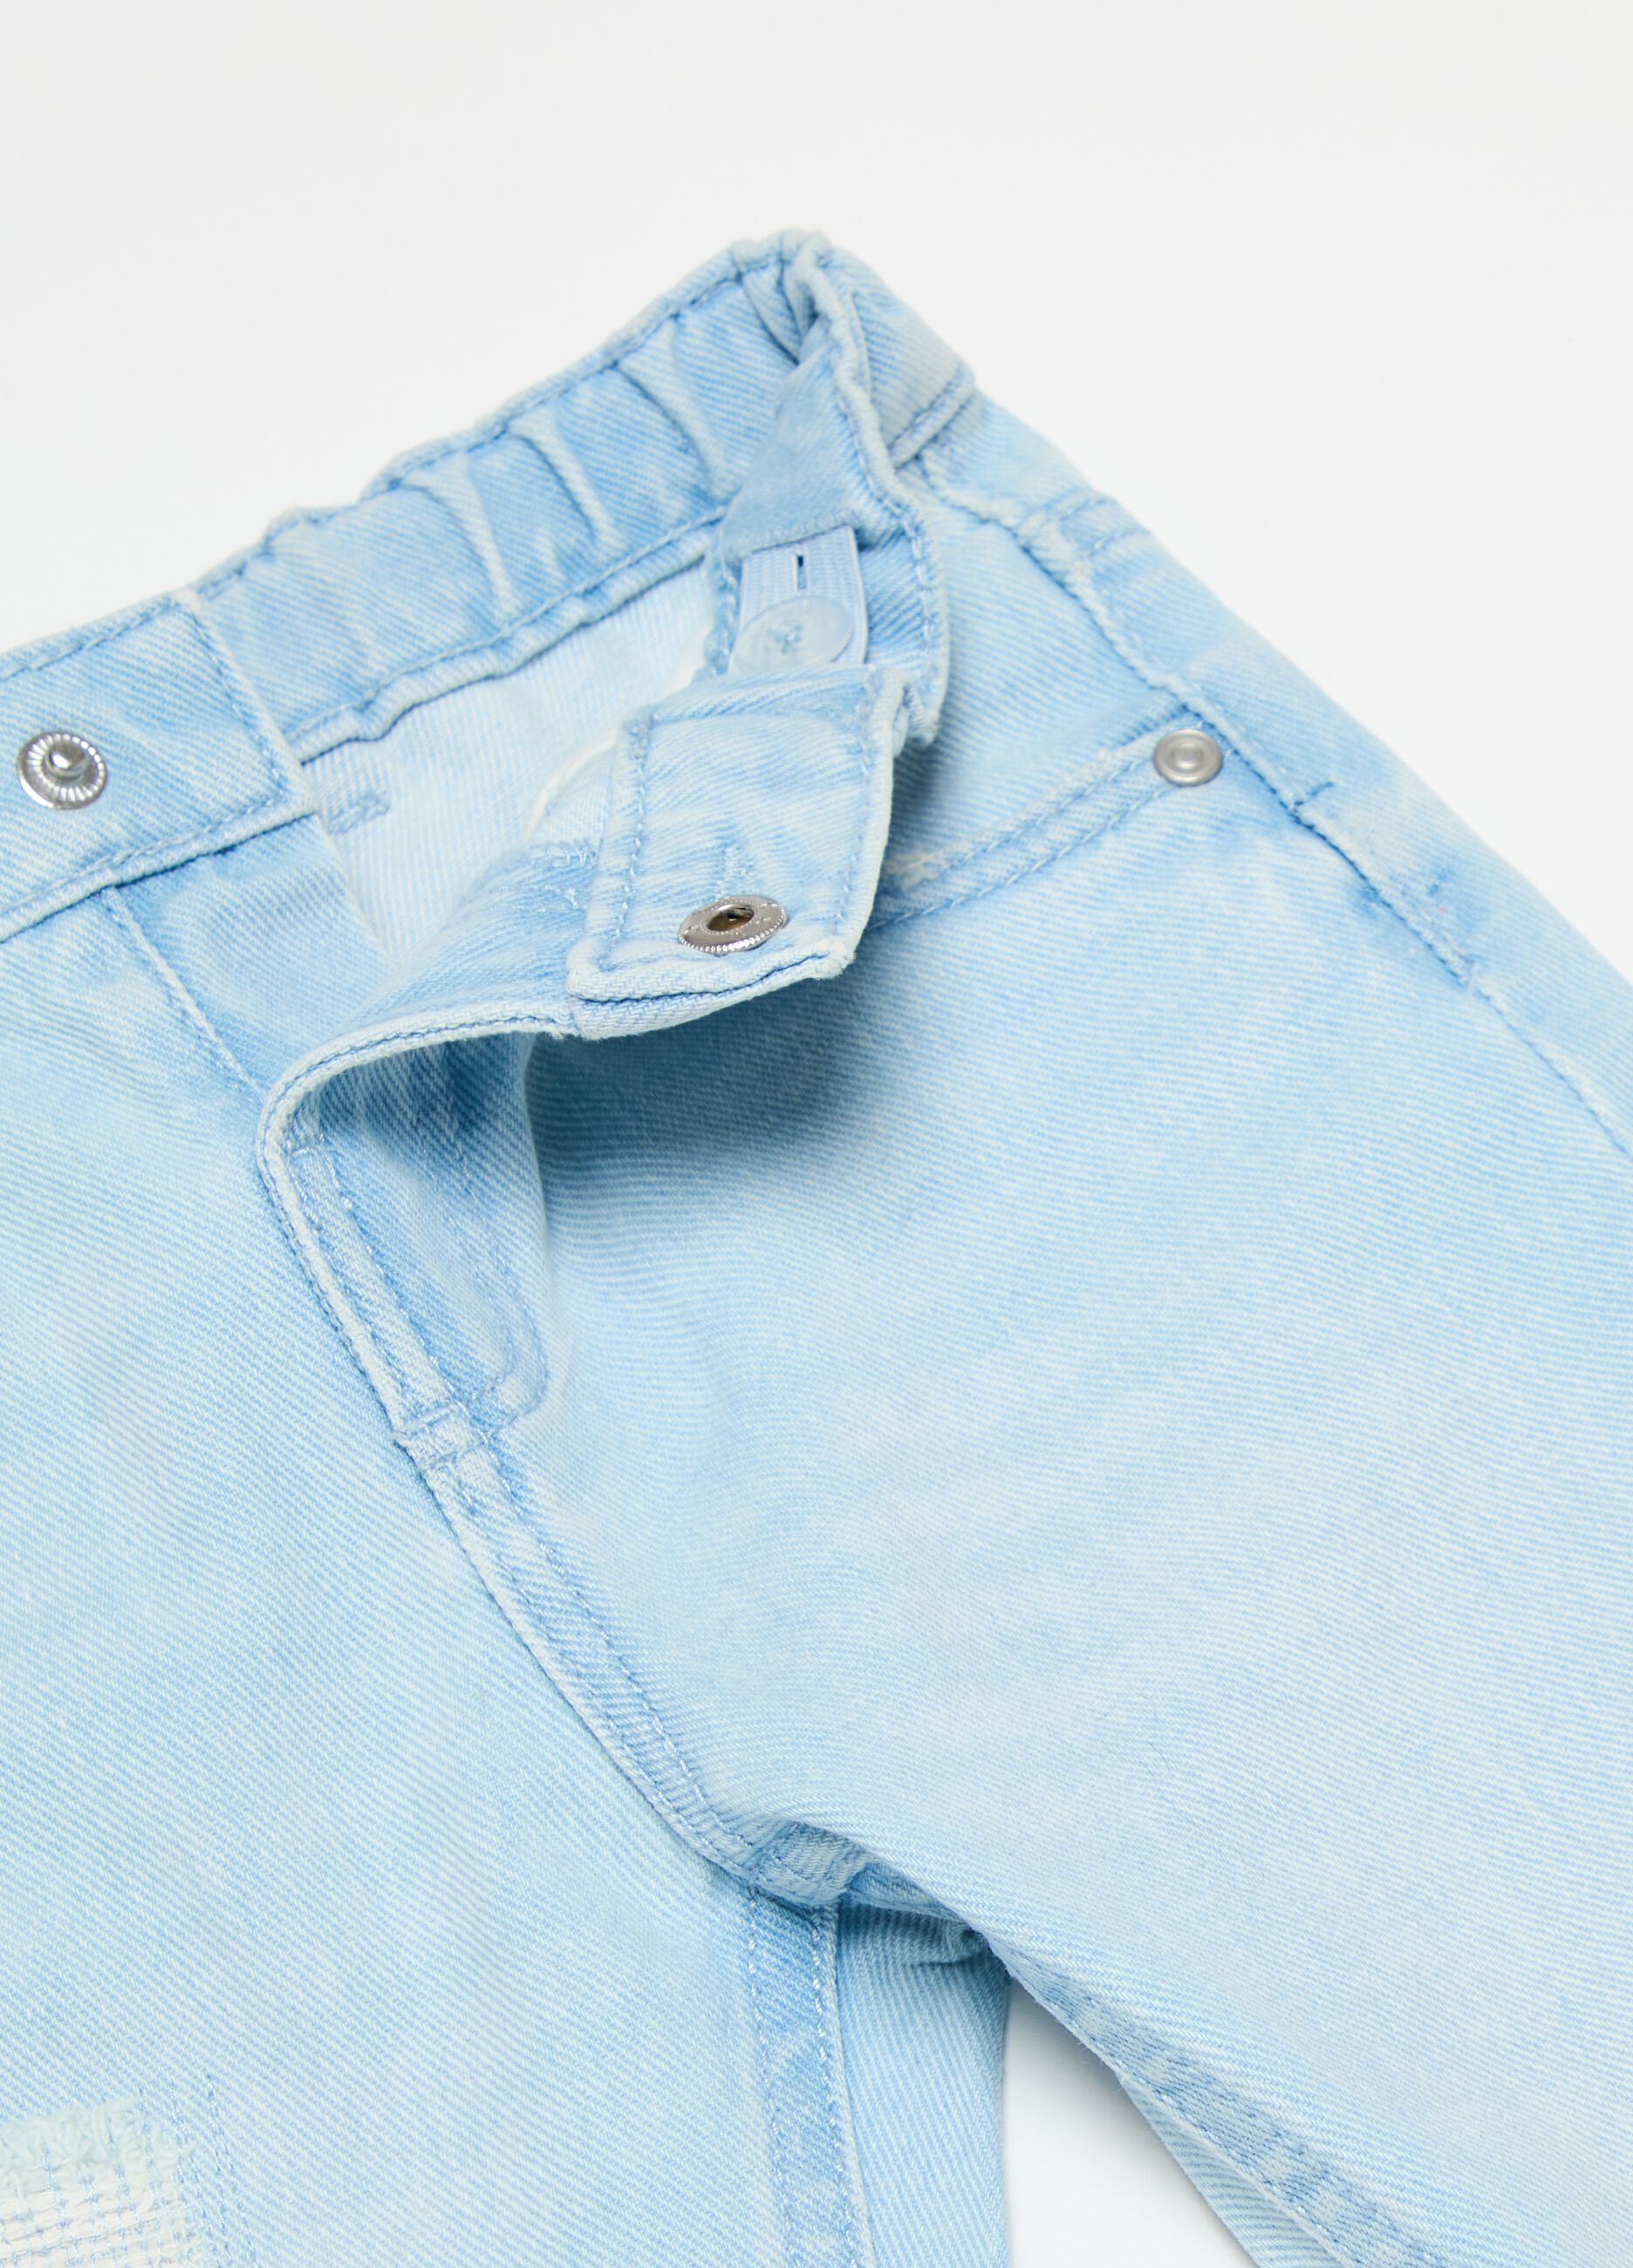 Cotton jeans with abrasions